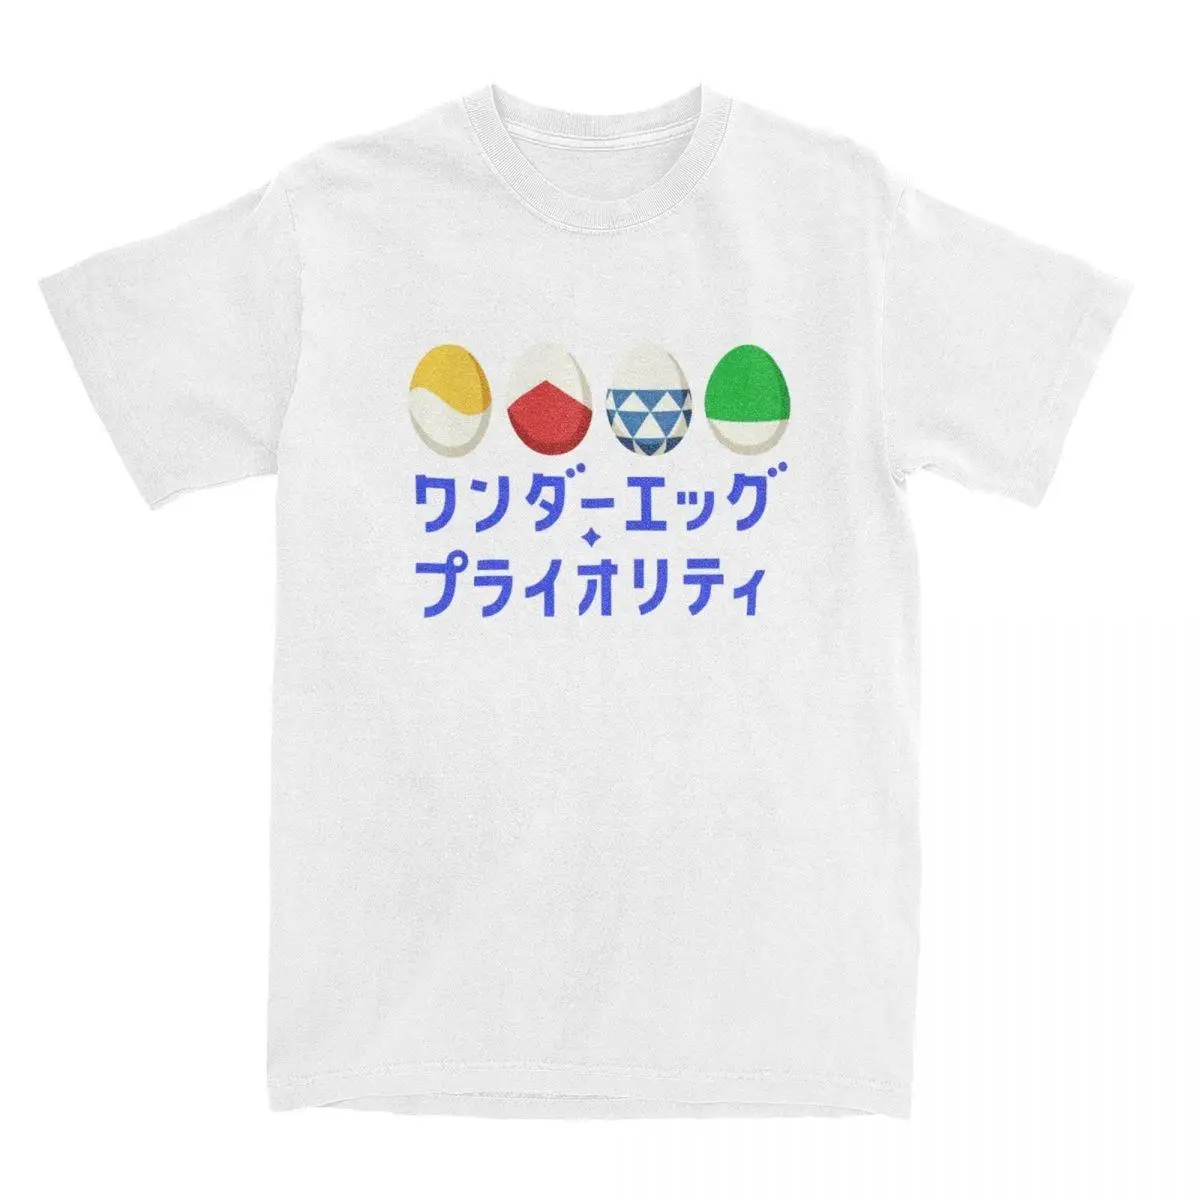 Novelty Wonder Egg Priority The Four Egg T-Shirts for Men Round Neck 100% Cotton T Shirts Anime Short Sleeve Tee Shirt Plus Size